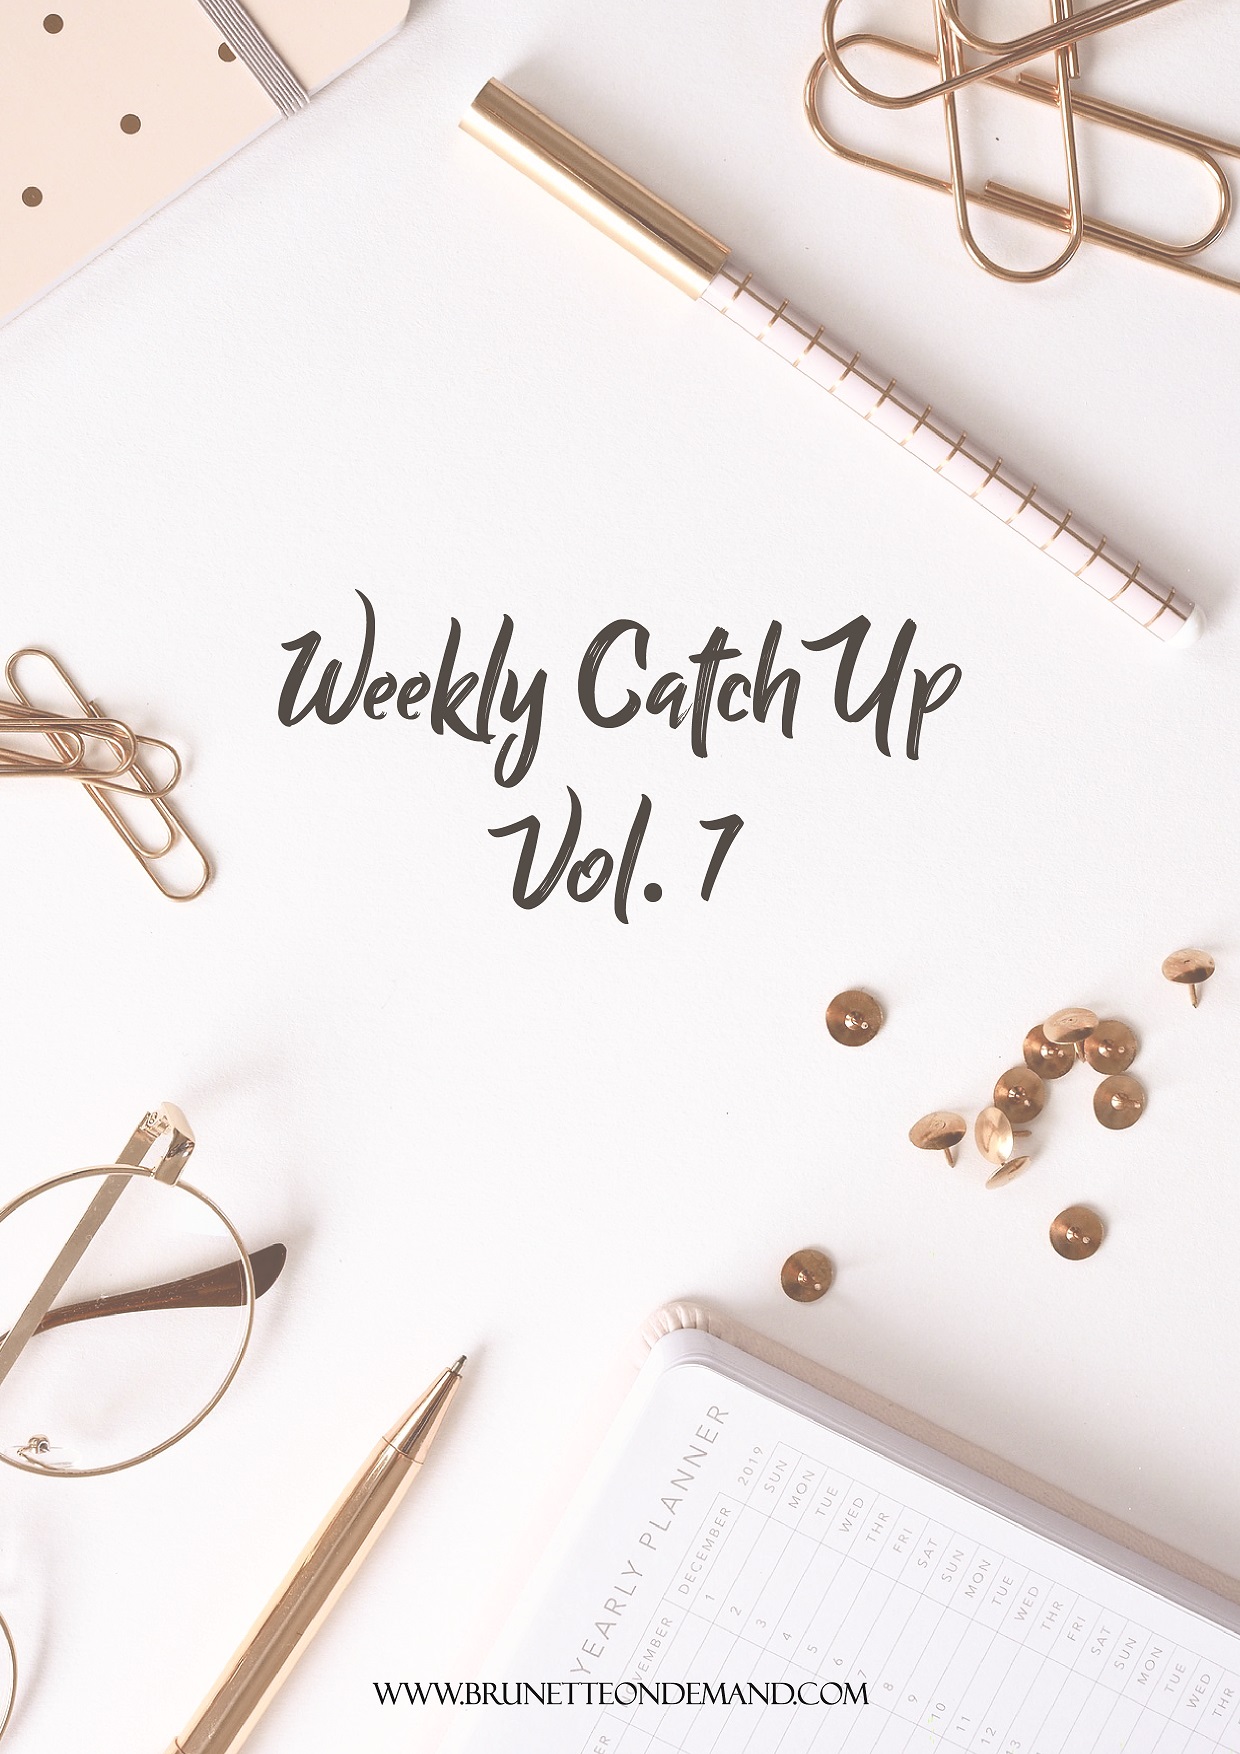 Weekly Catch-Up Vol. 7